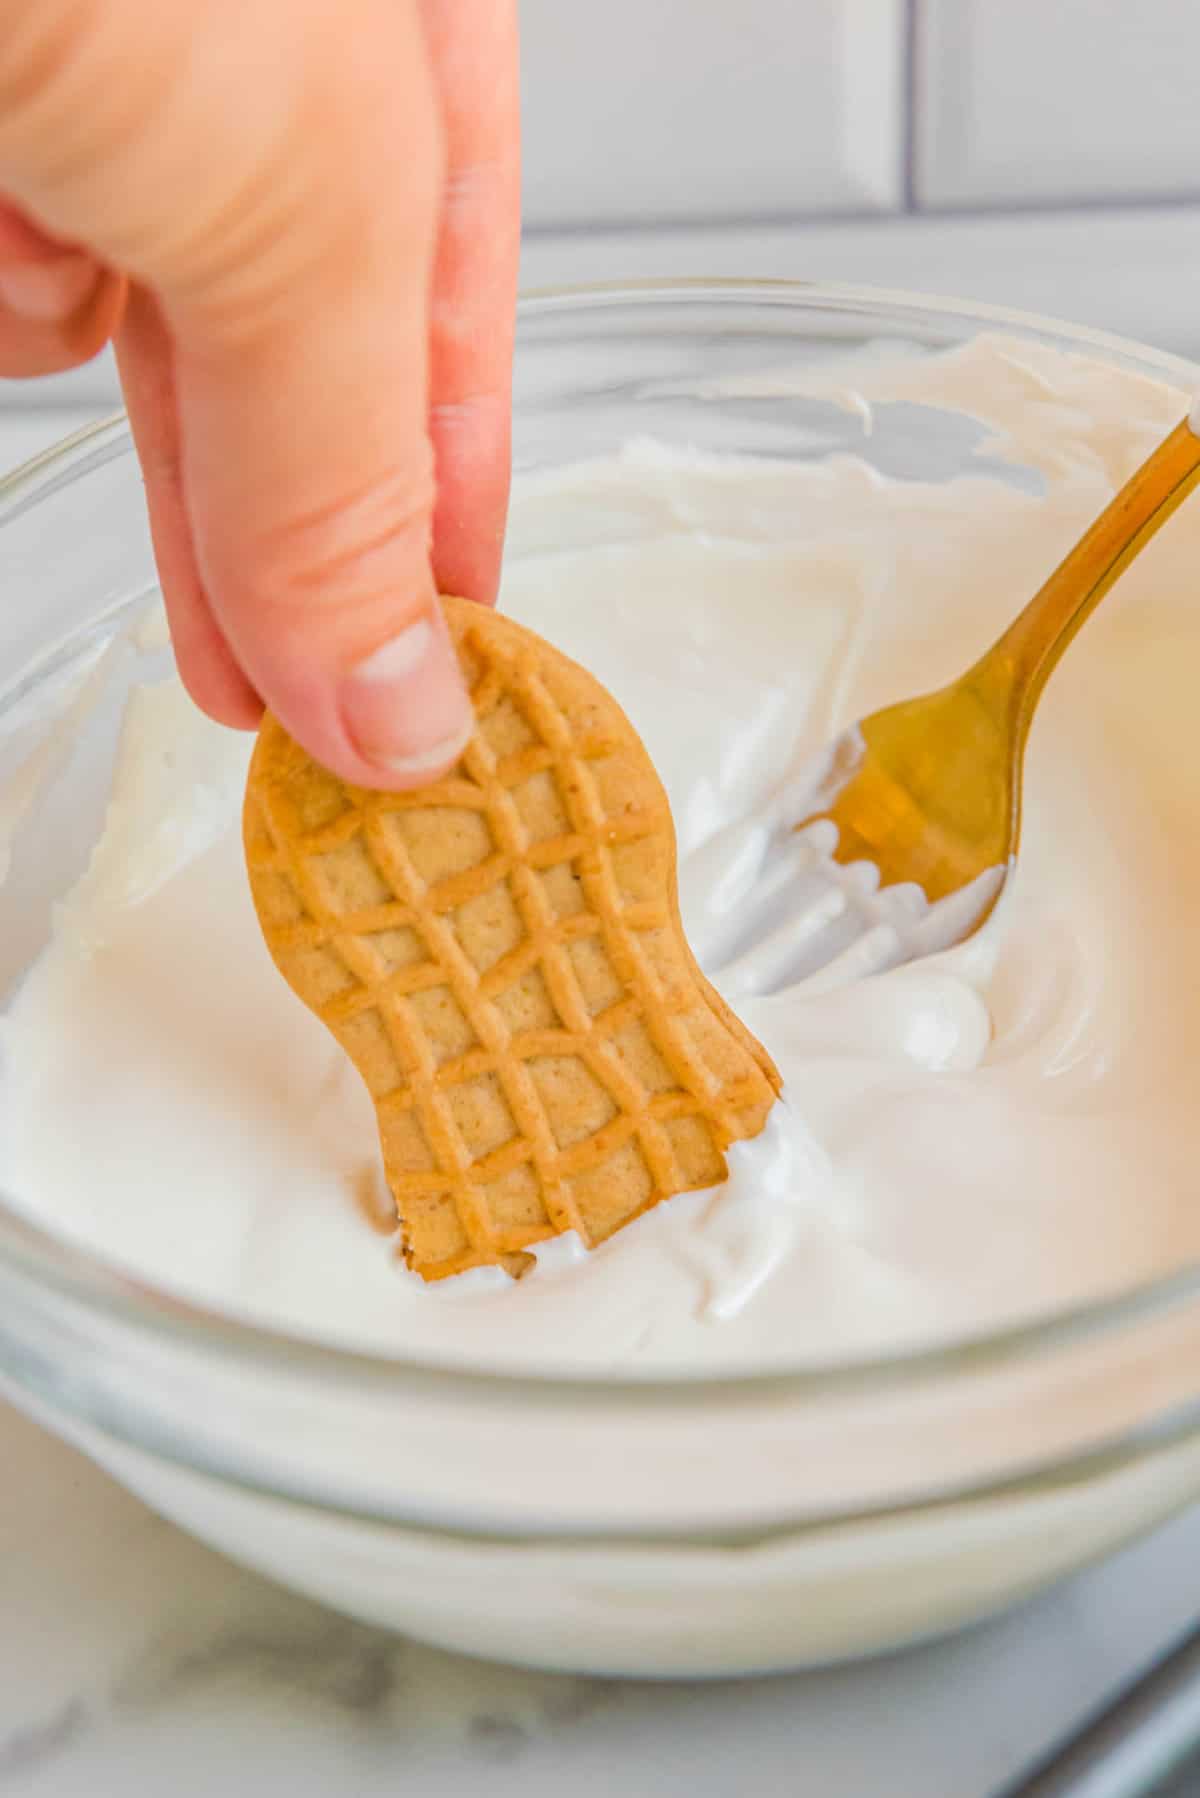 Dipping Nutter Butter Cookie in White Candy Melt